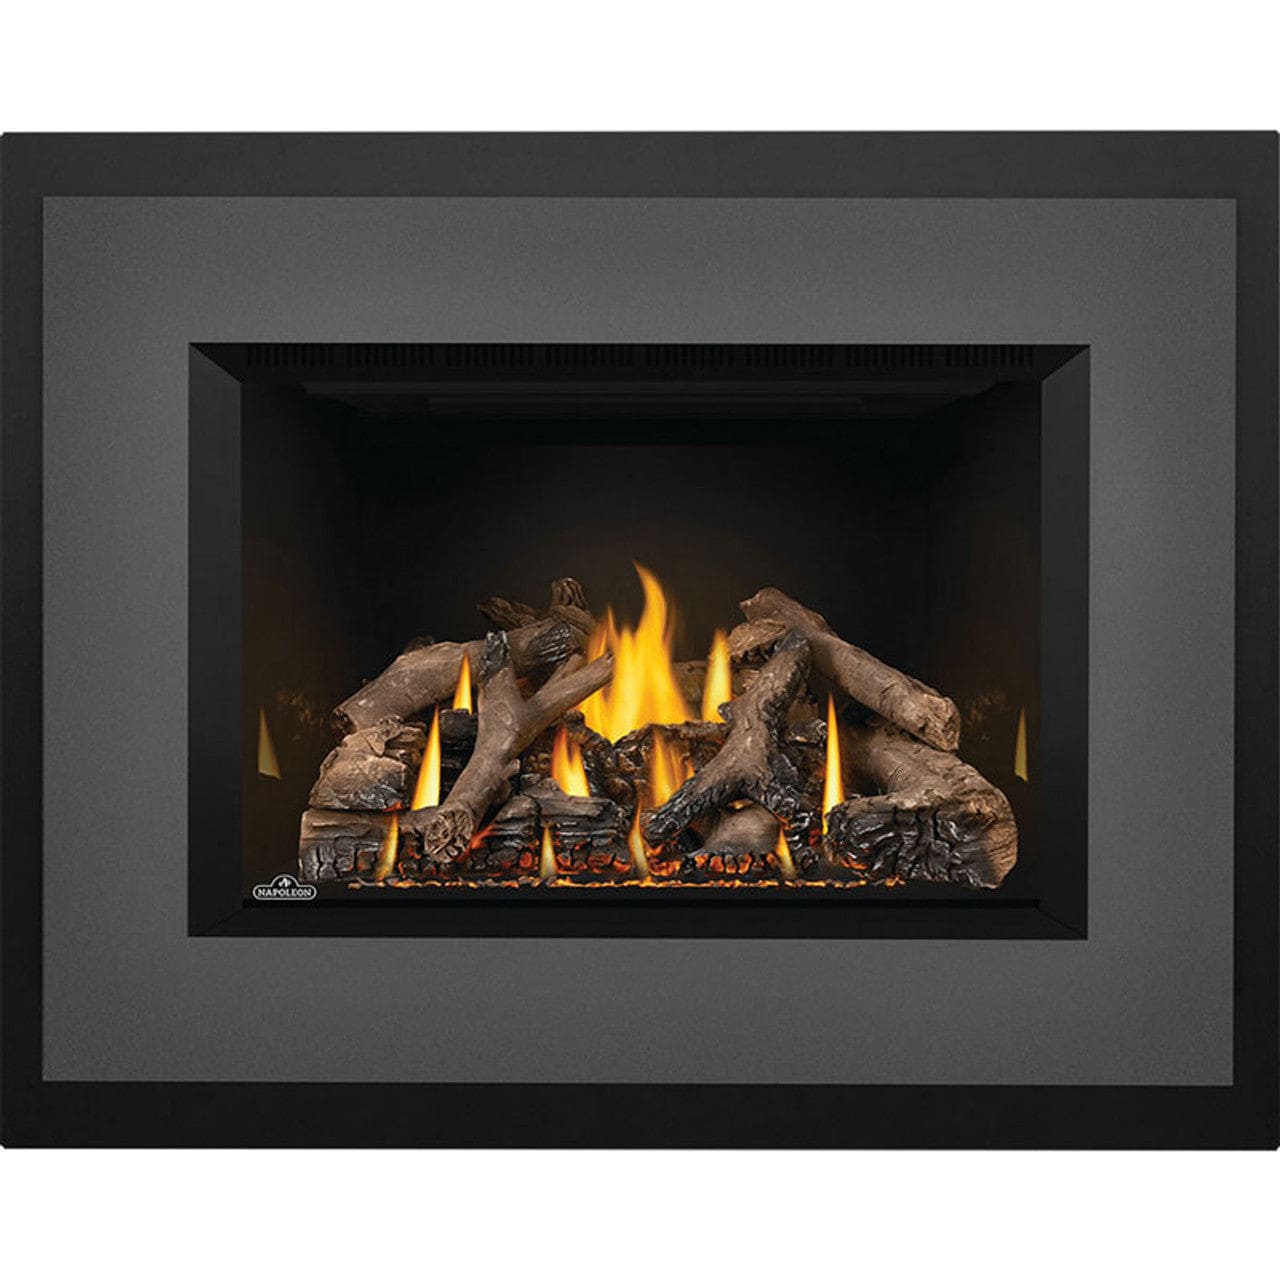 Napoleon OAKVILLE X4 Direct Vent Electronic Ignition Natural Gas Firebox Insert - GDIX4N - Chimney Cricket